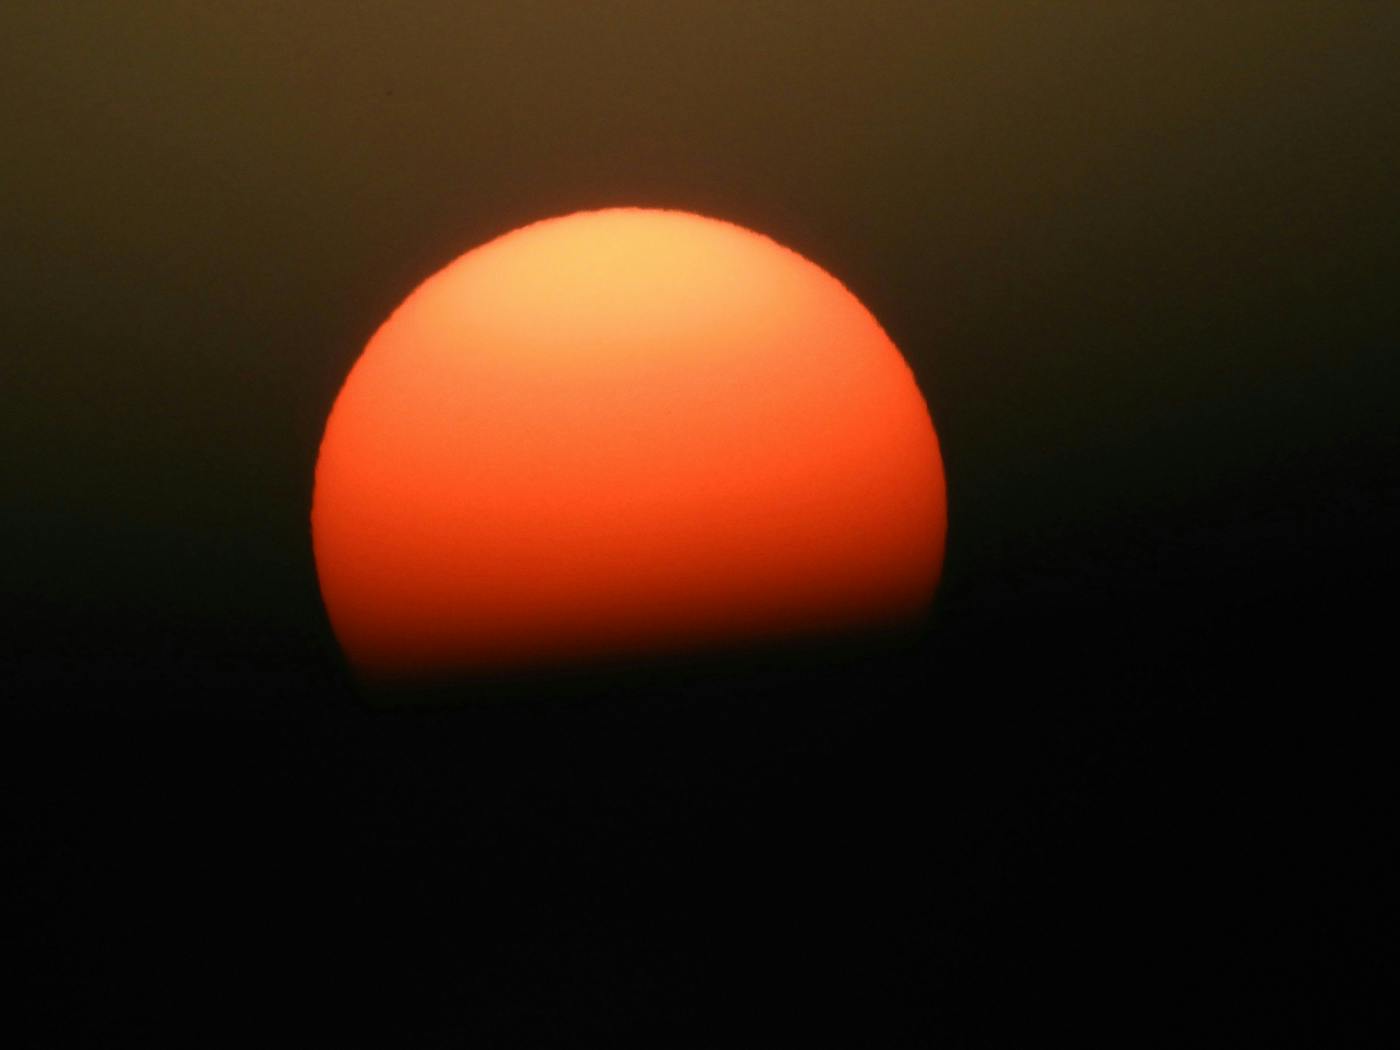 a sunset, the sun looking like an orange ball slipping into black ink